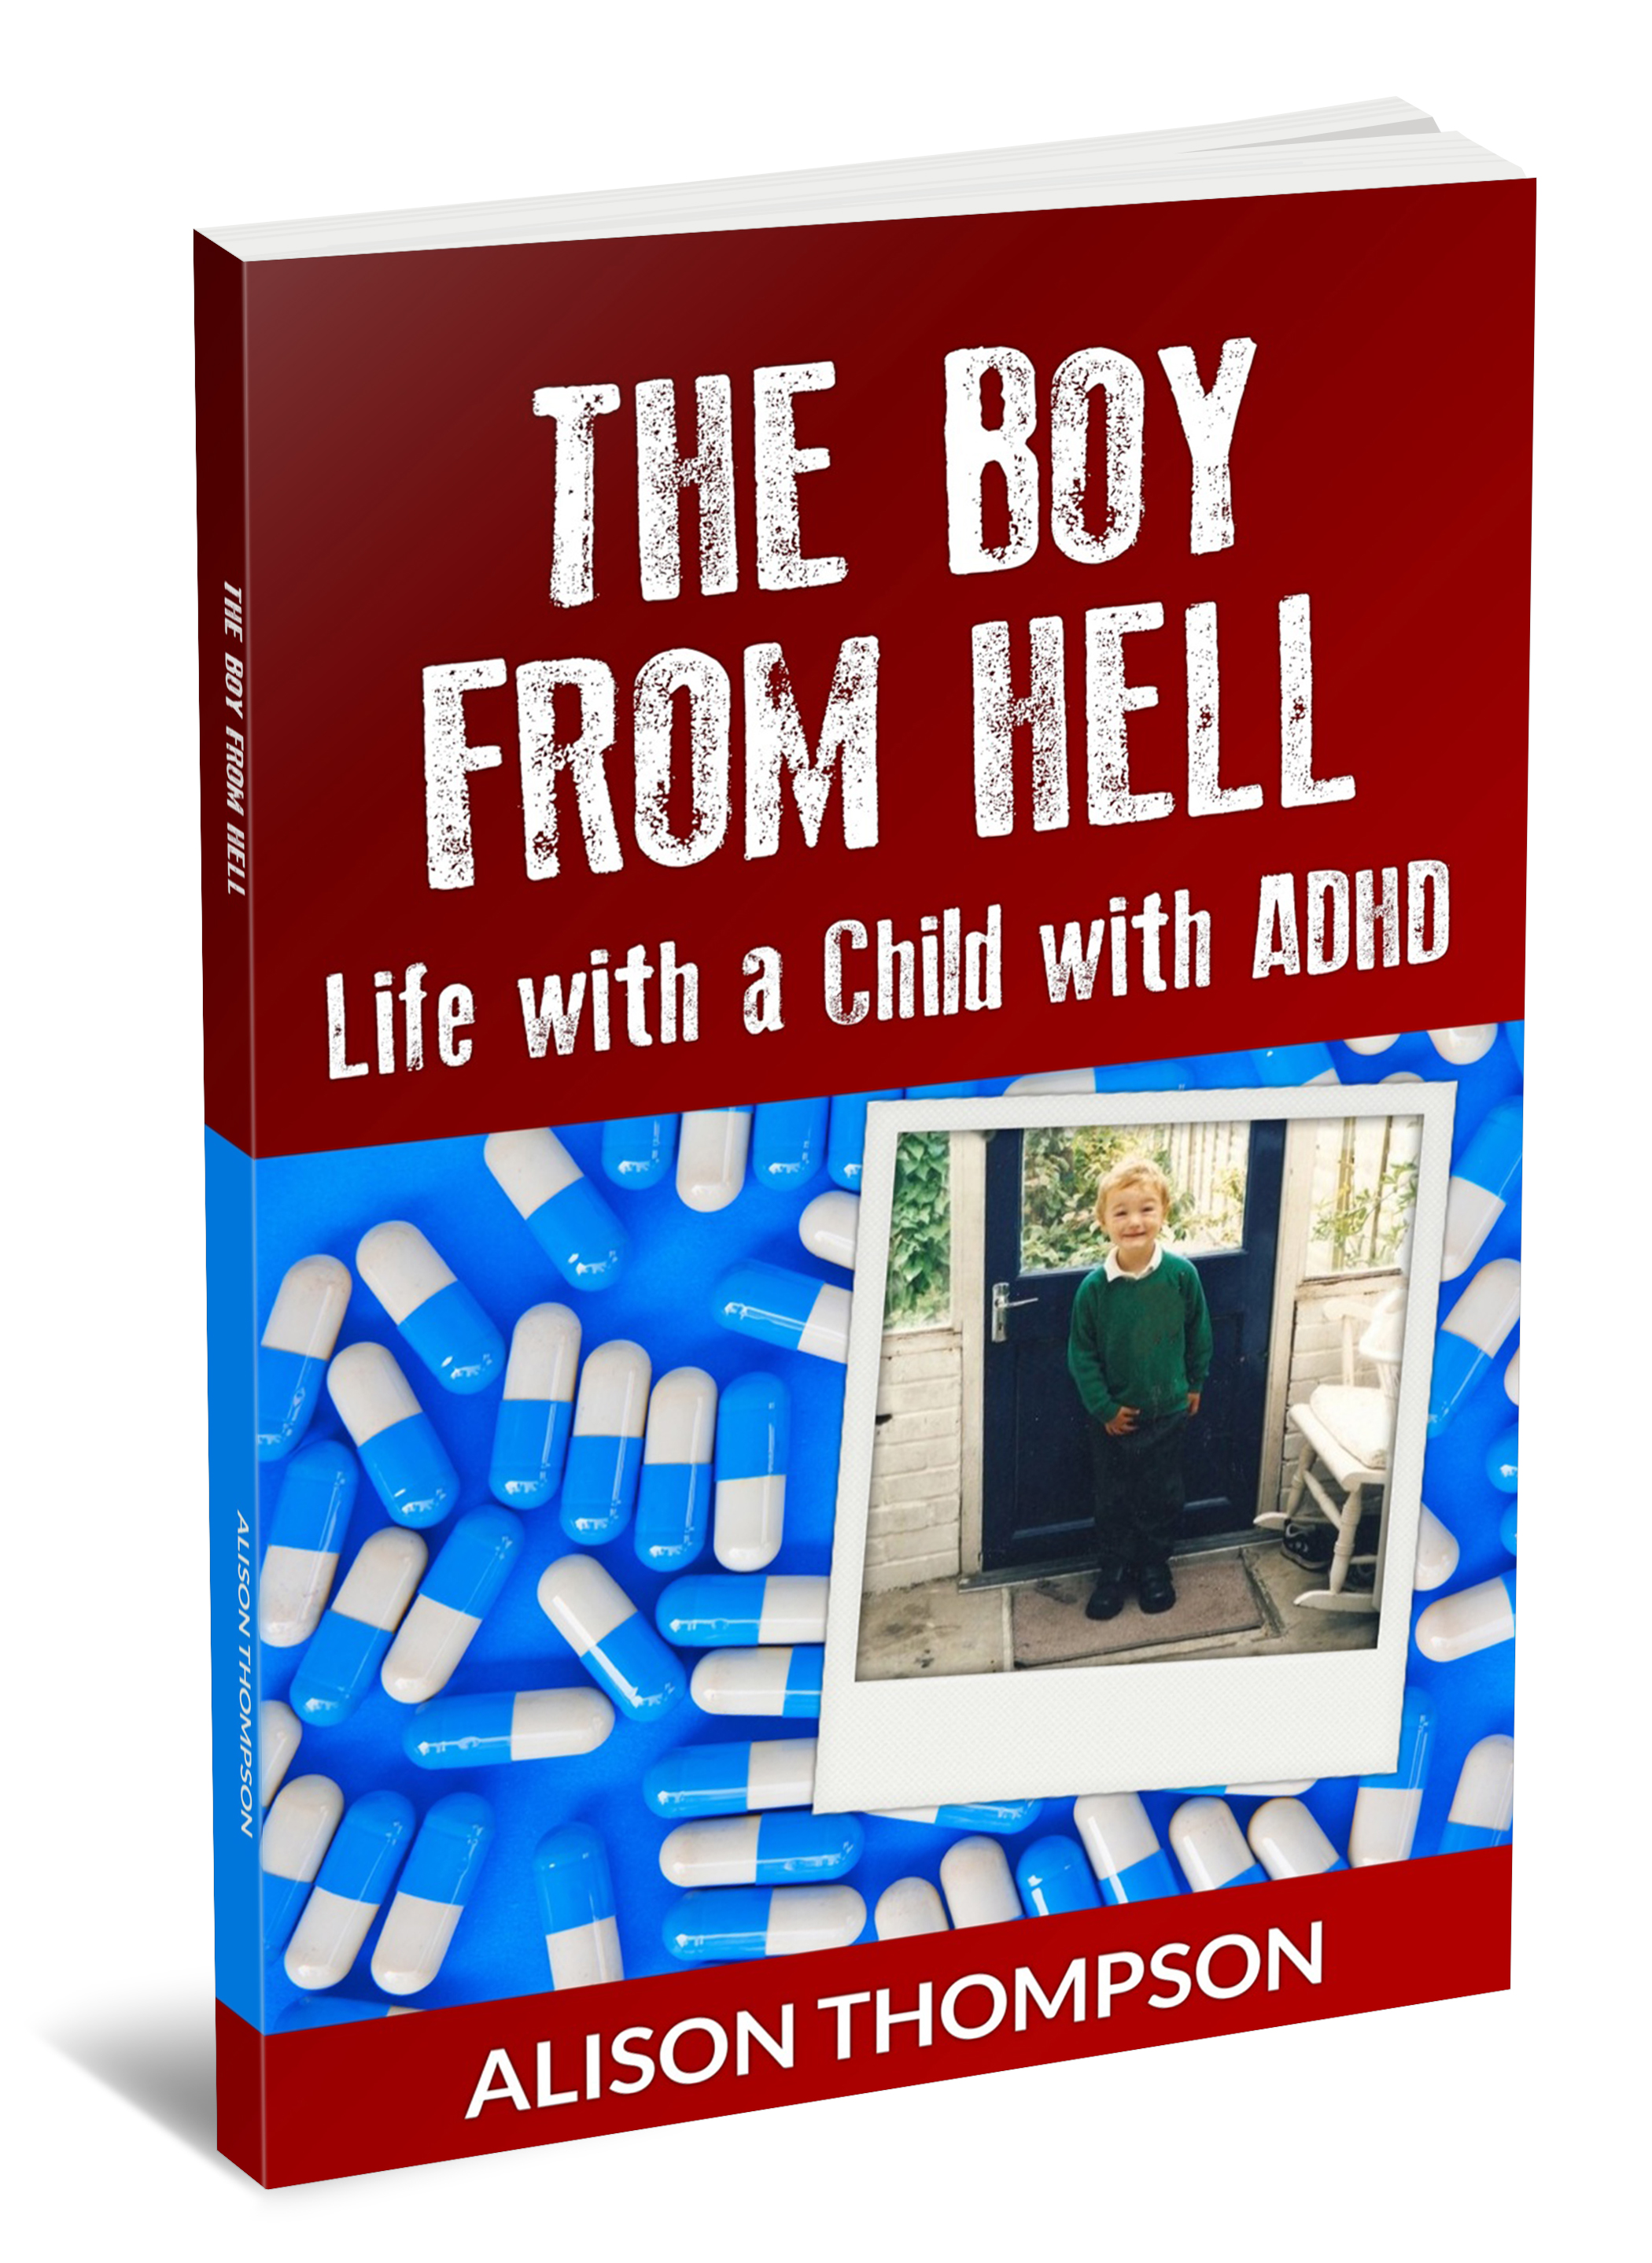 The boy from hell